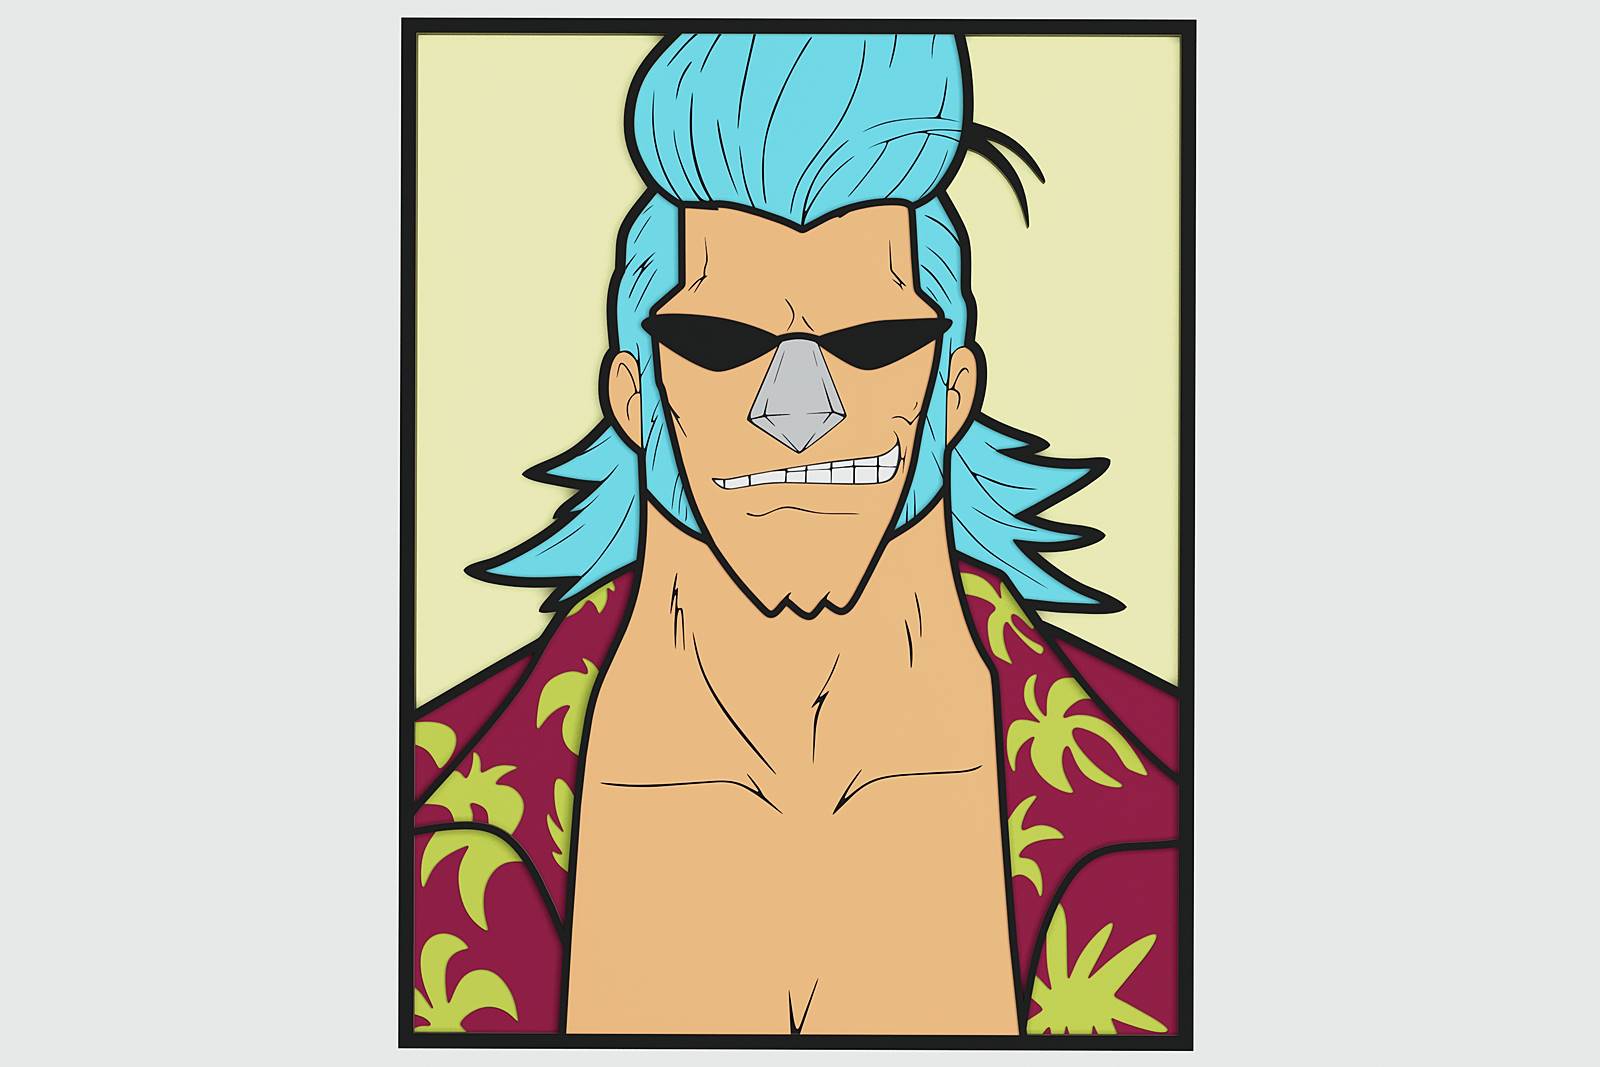 Franky (One Piece) Layered Design for cutting